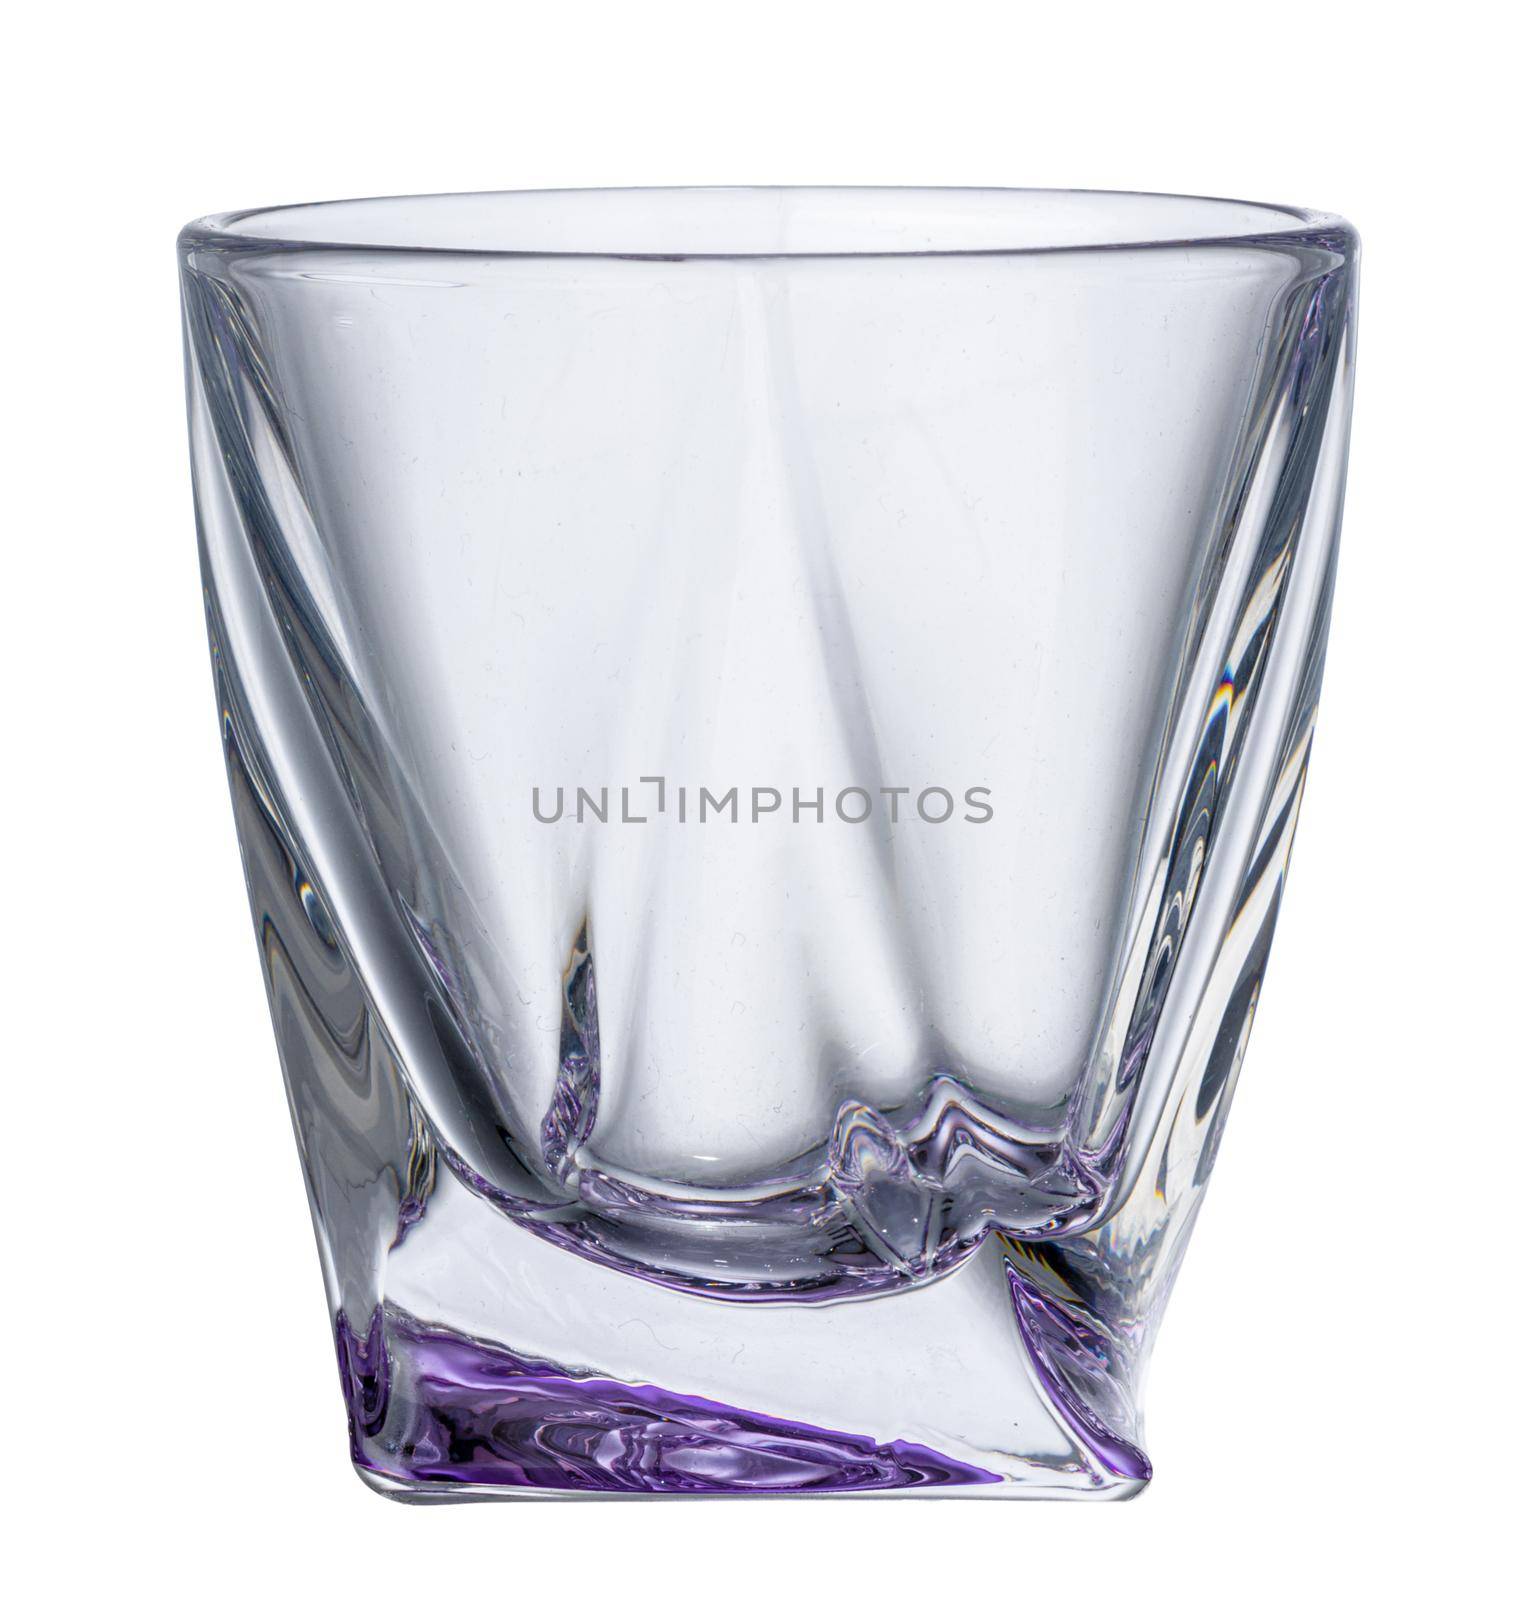 New empty glass isolated on white background by Fabrikasimf